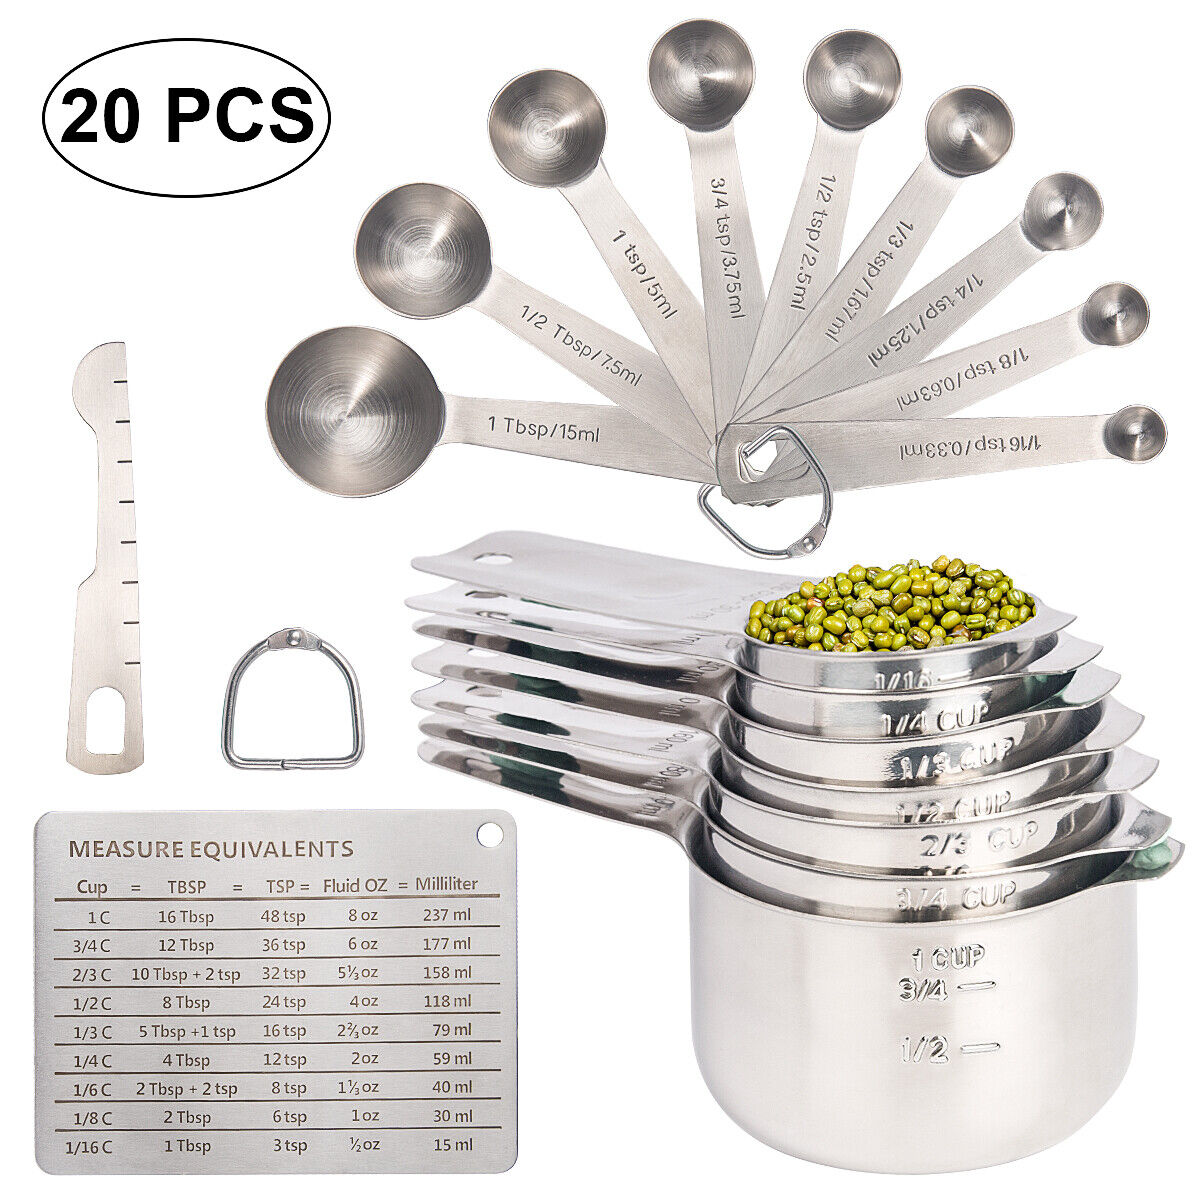 20PCS Measuring Cups Measuring Spoons Set Food-Grade Stainless Steel Measure Cup TQS Does not apply - фотография #10